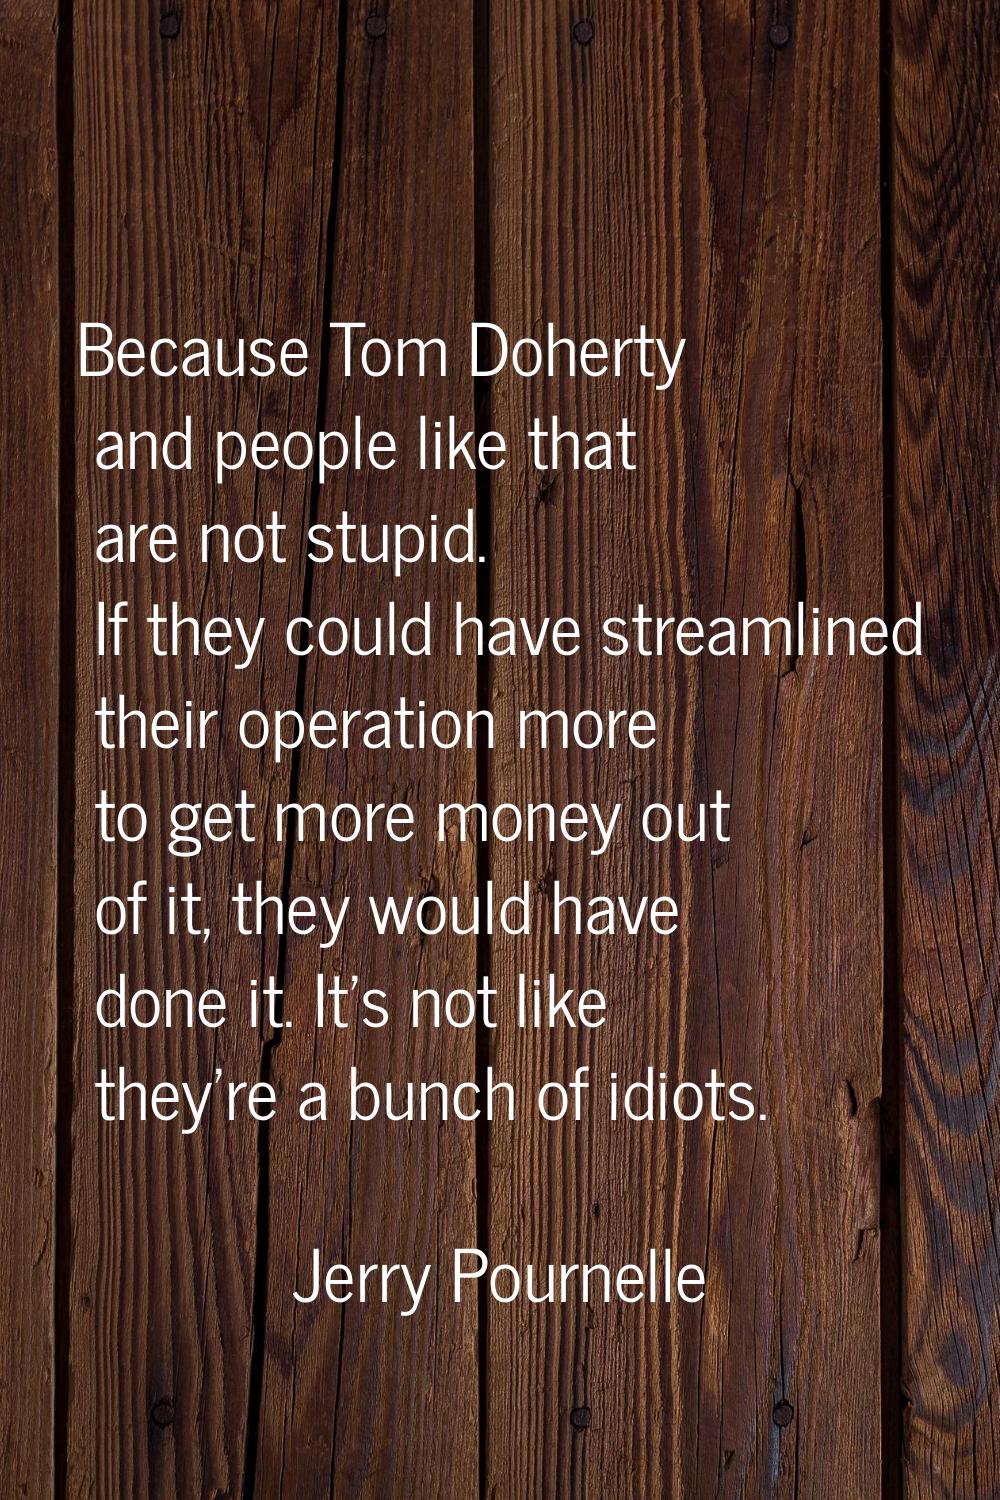 Because Tom Doherty and people like that are not stupid. If they could have streamlined their opera